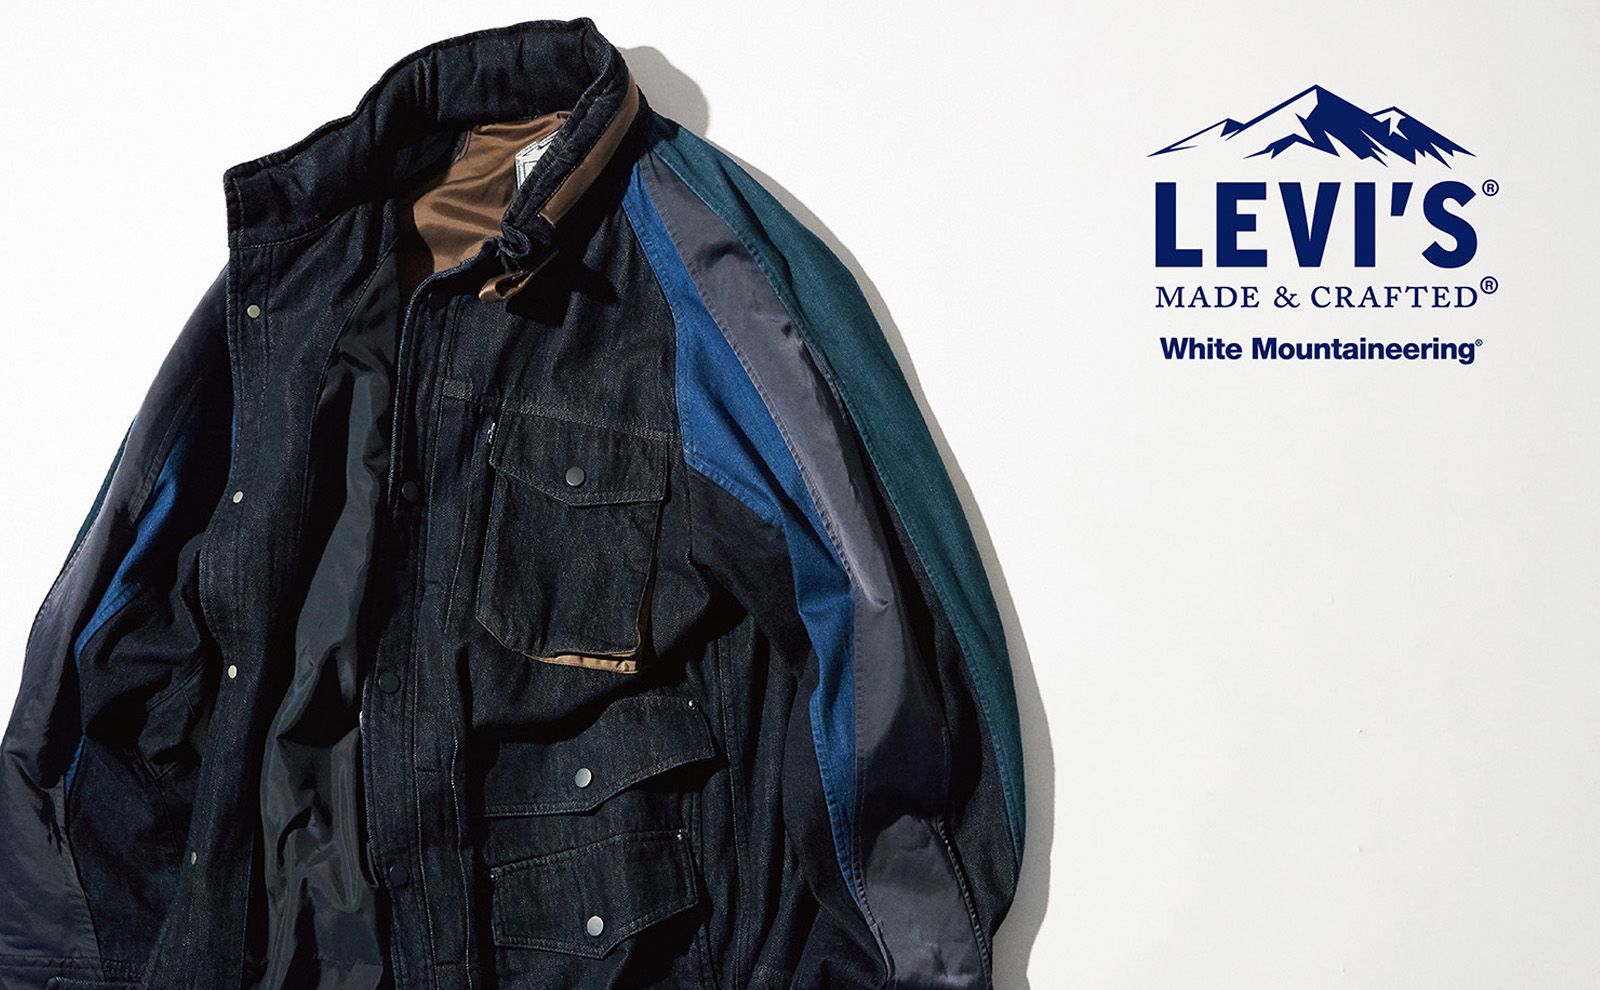 White Mountaineering】 LEVI'S MADE & CRAFTEDコラボレーションウェア 